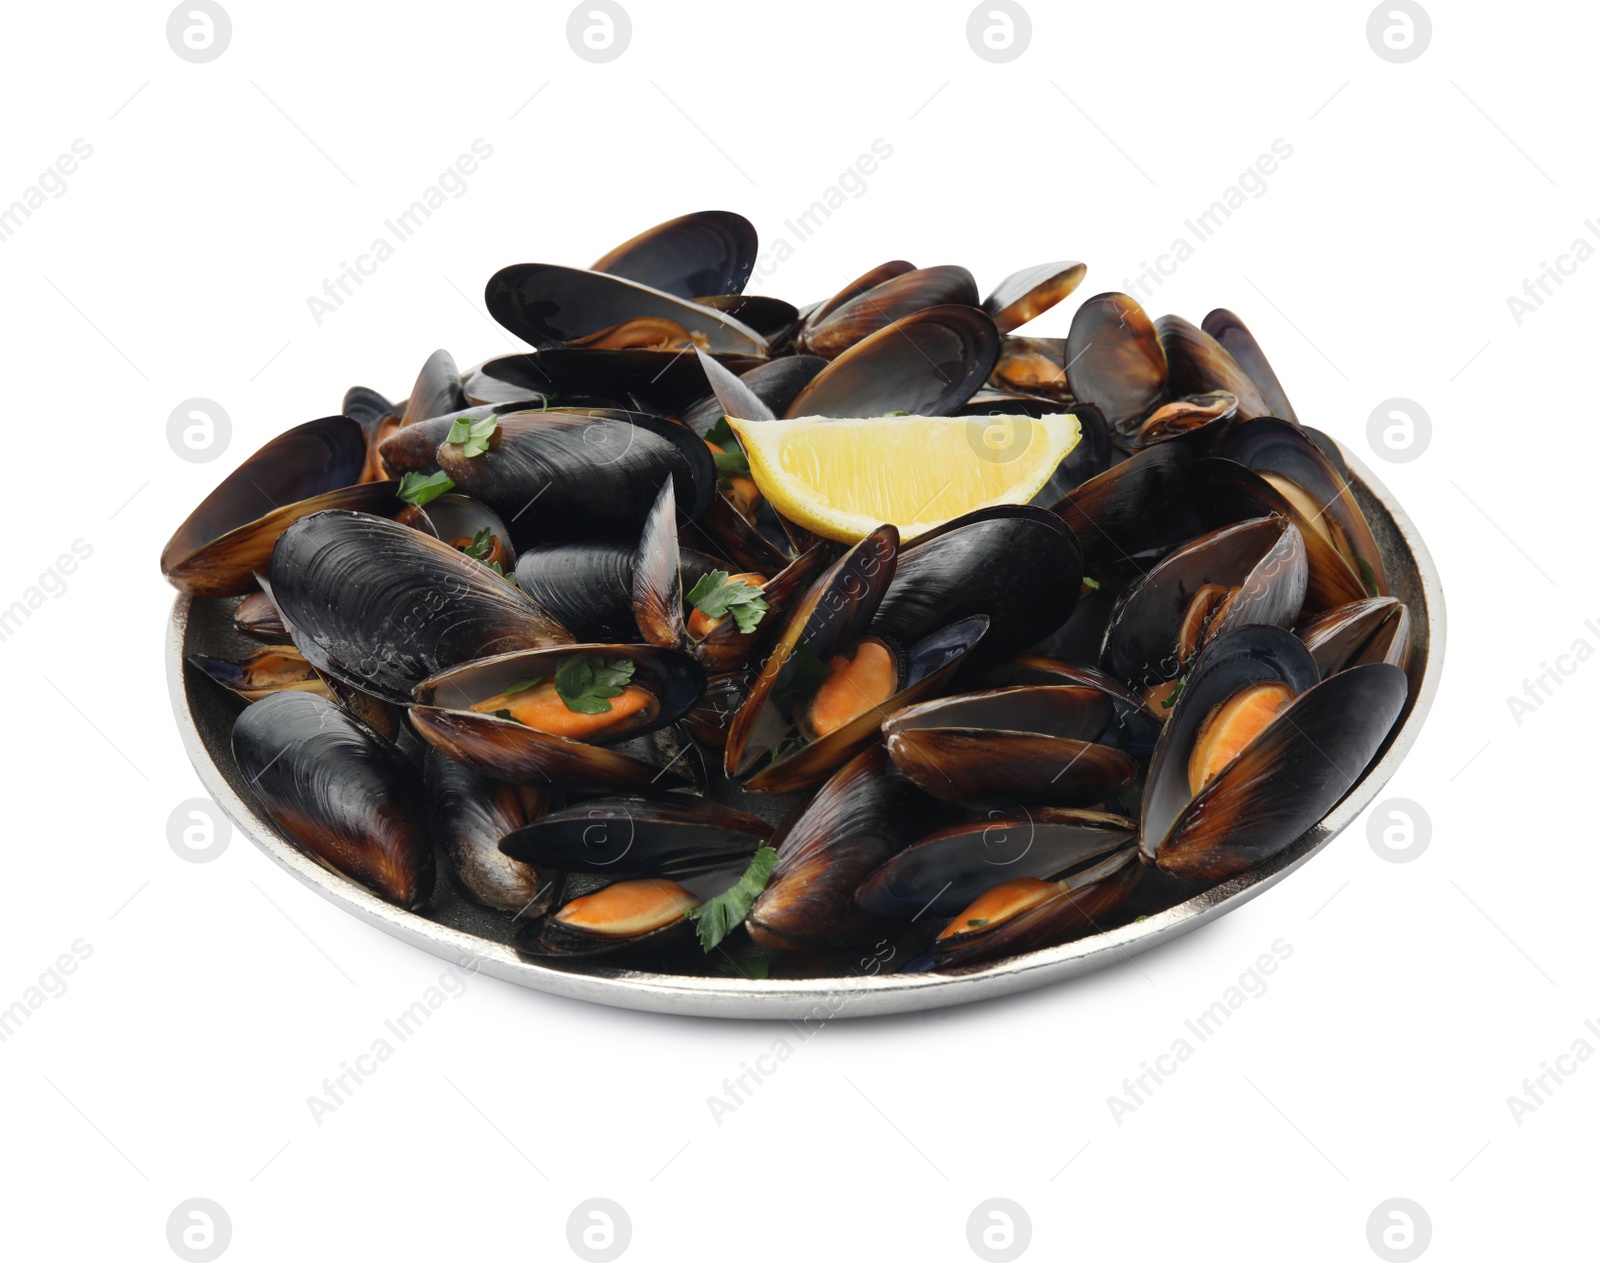 Photo of Plate with cooked mussels, parsley and lemon isolated on white